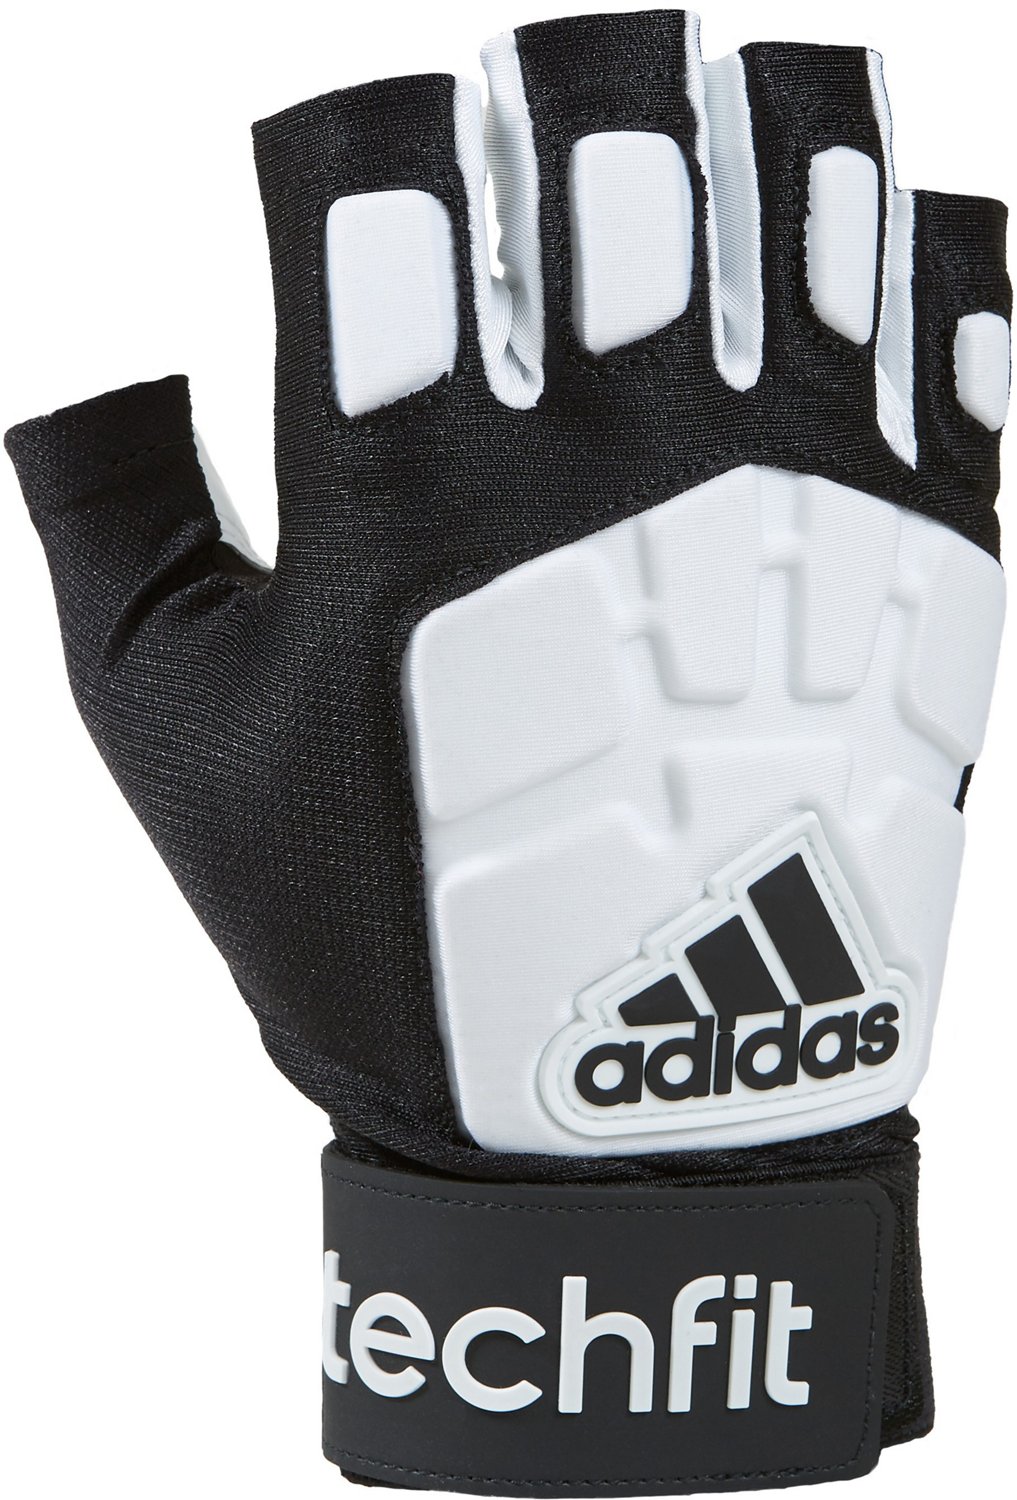 Football Gloves for Youth \u0026 Adults 